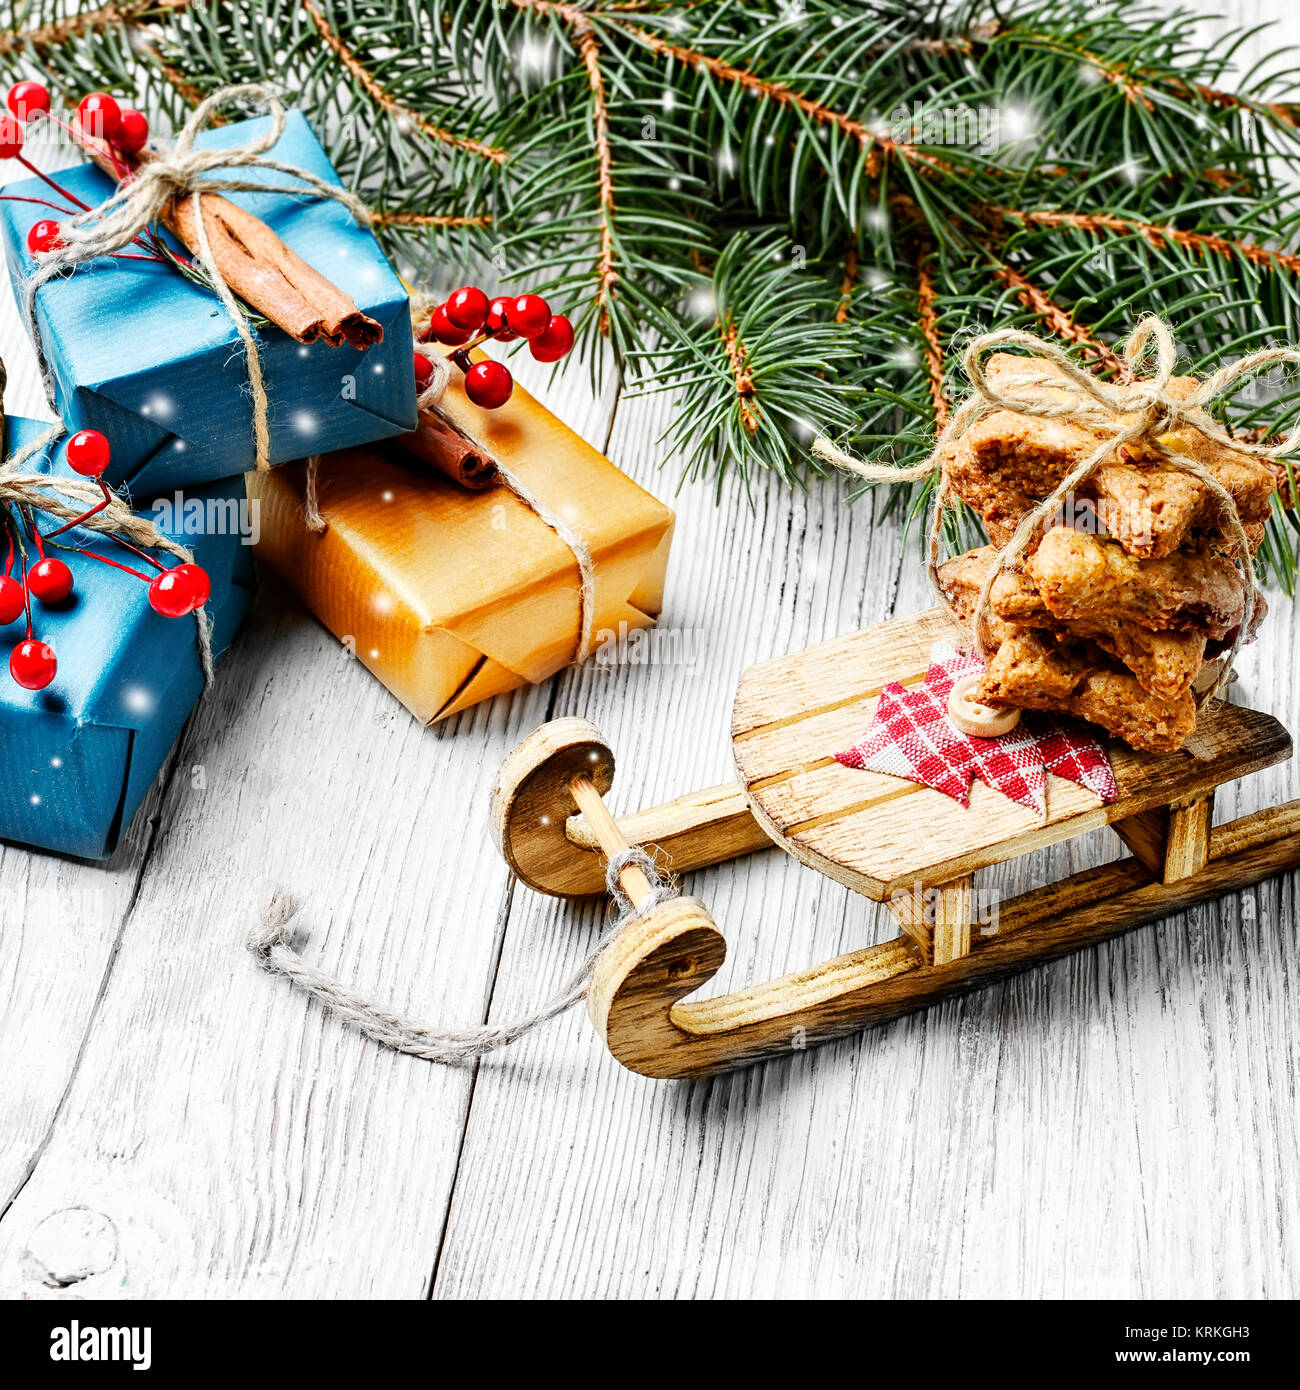 Christmas card with old fashioned Christmas sleigh of Santa Claus and Christmas ts Stock Image